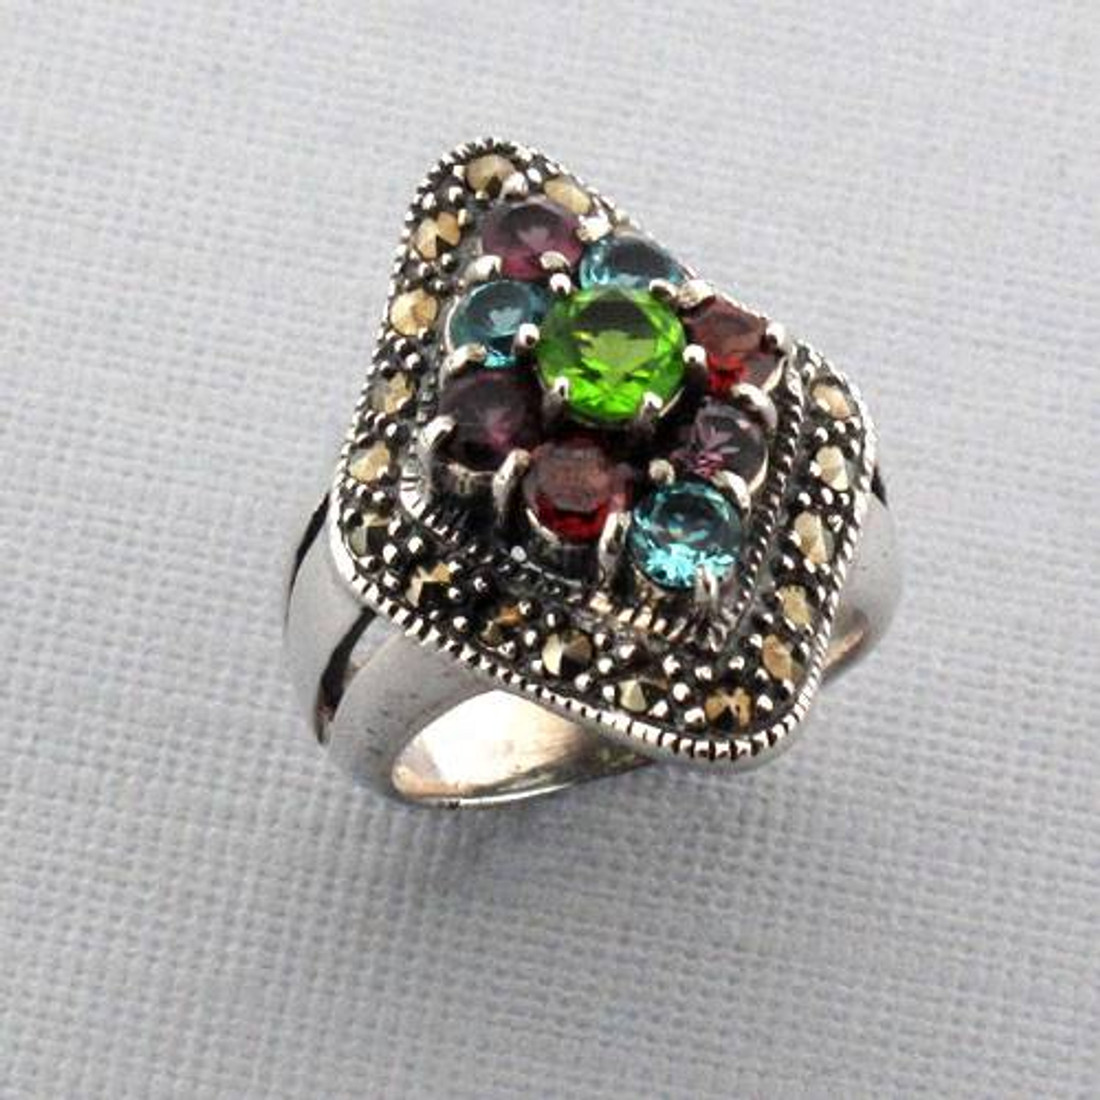 Amethyst Garnet Peridot Marcasite Sterling Silver Ring Cocktail Size 6.5 Jewelry